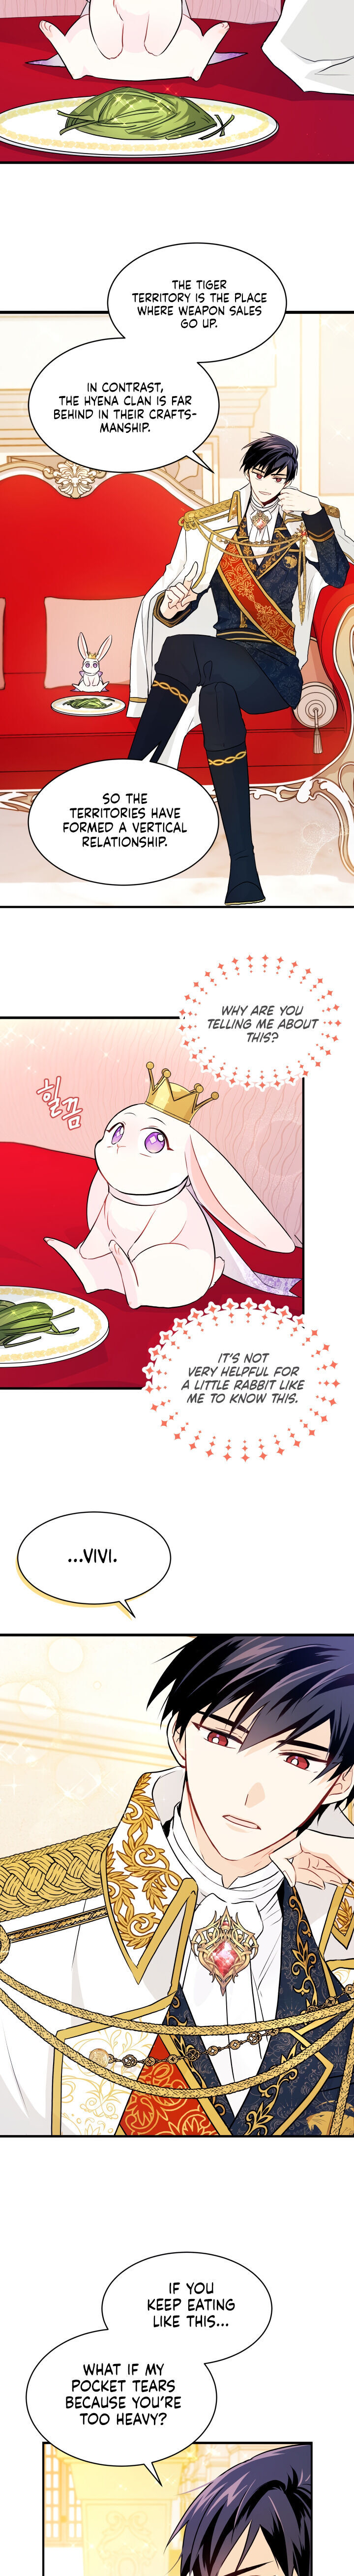 The Symbiotic Relationship Between A Rabbit and A Black Panther - Chapter 18 Page 19